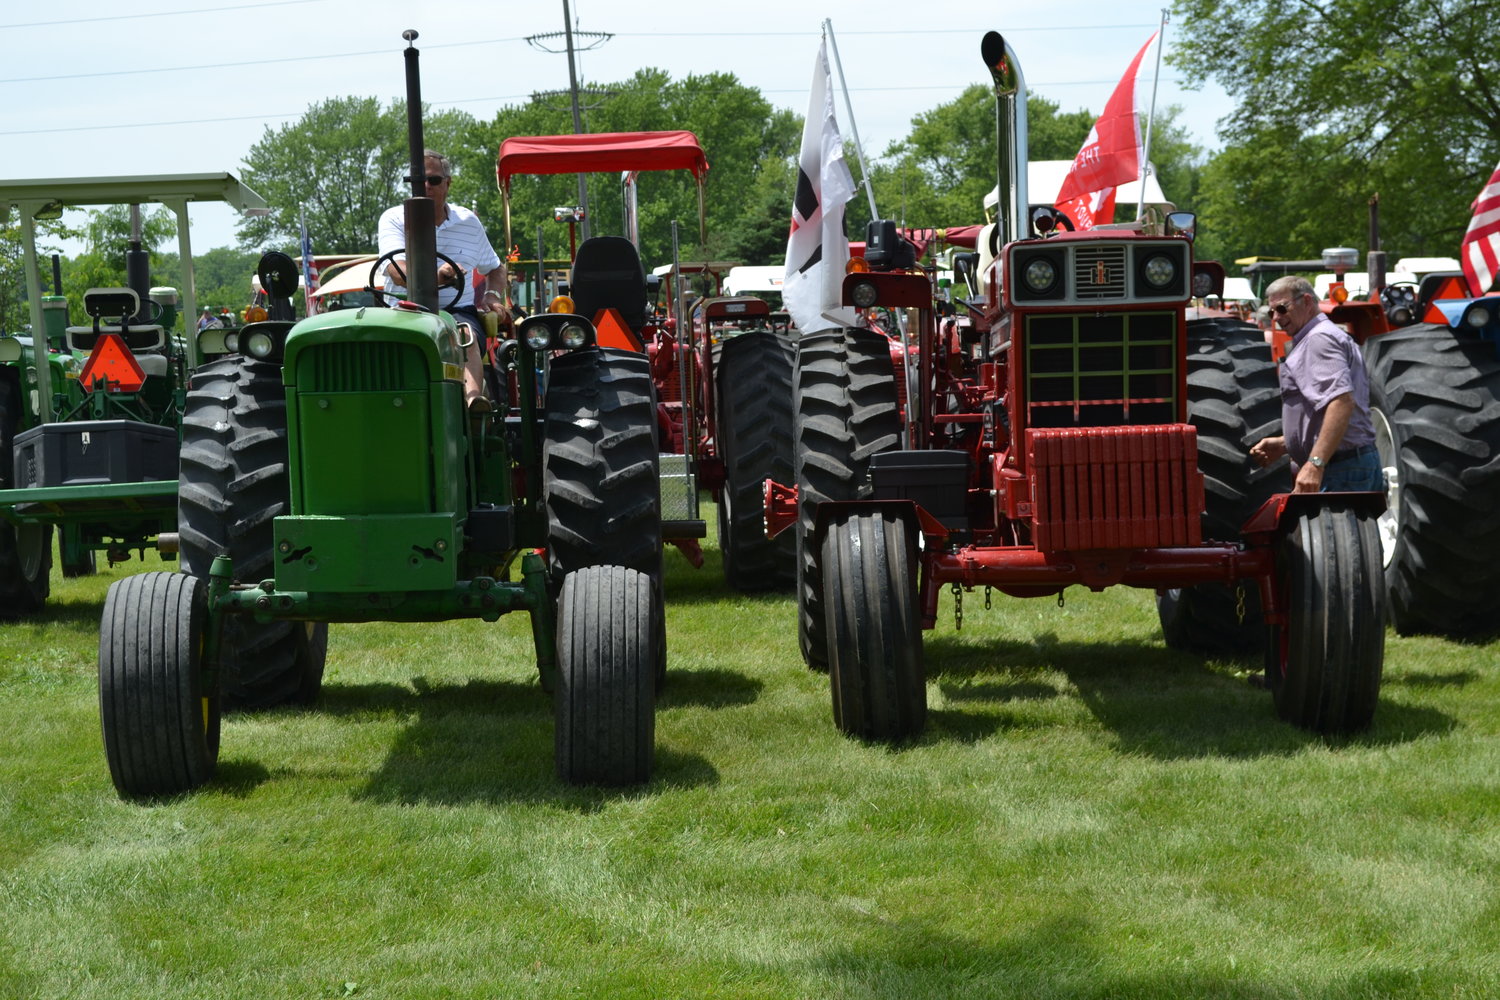 A first for West Liberty, tractor drivers parking their tractors at the Muscatine County Fairgrounds Sunday evening.  Pearticipants came from as far as Michigan to participate in this year's Tractorcade despite temperatures being in the upper 90s.